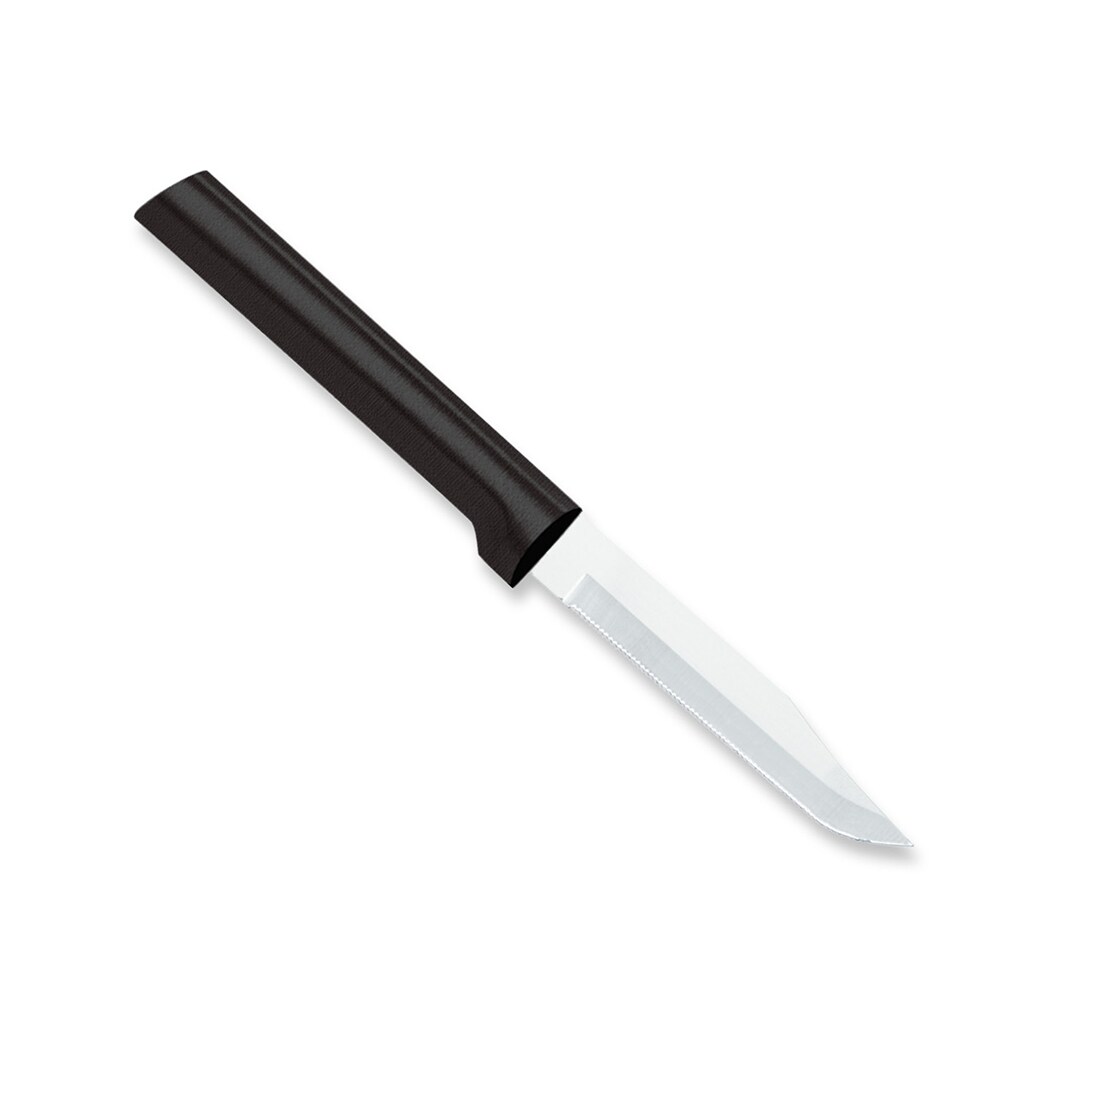 Serrated Paring Knife